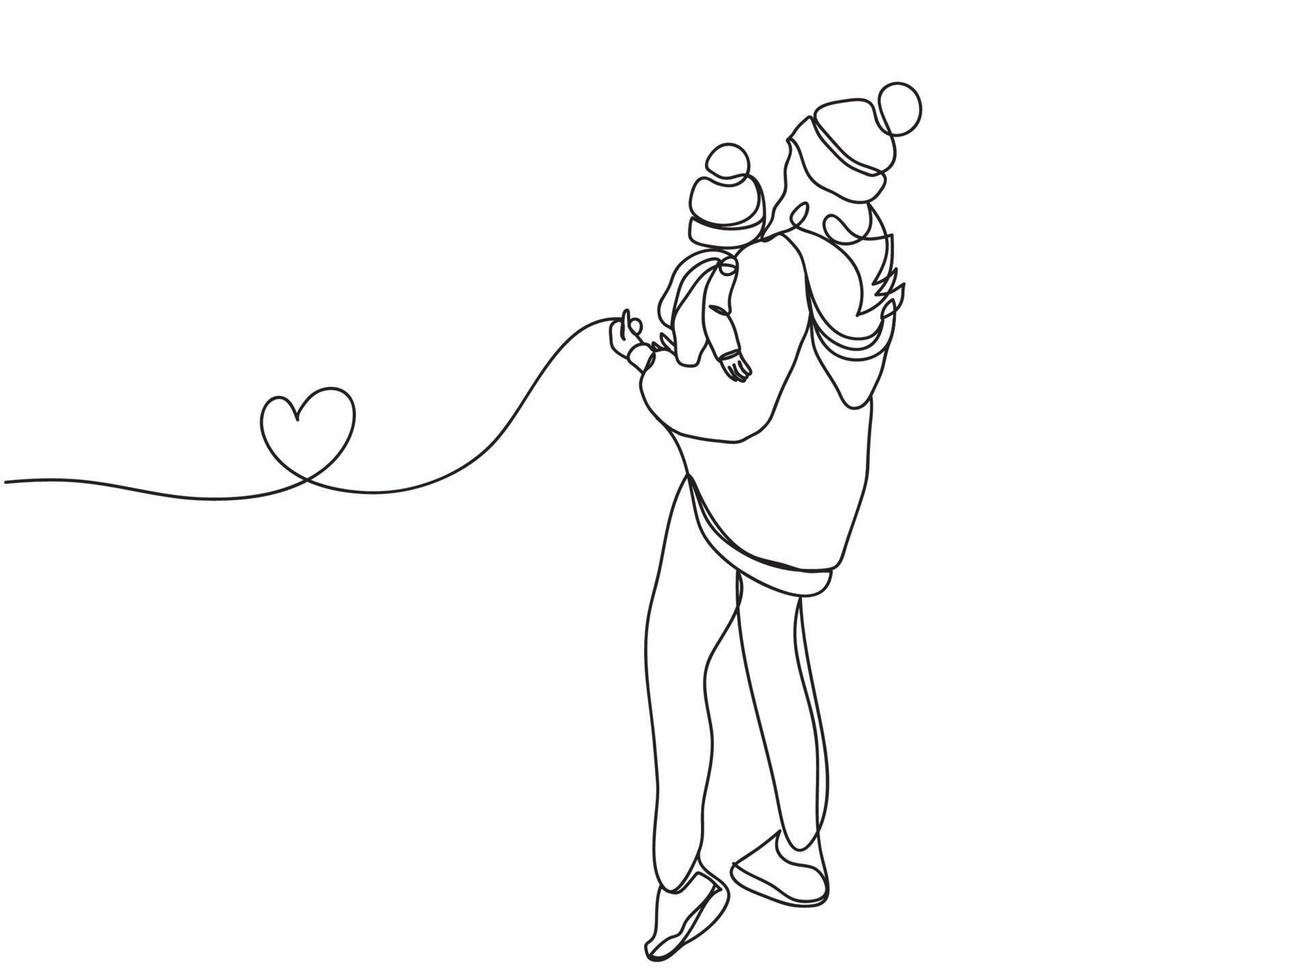 Mother and baby line art vector illustration for Happy mother's day card and background.